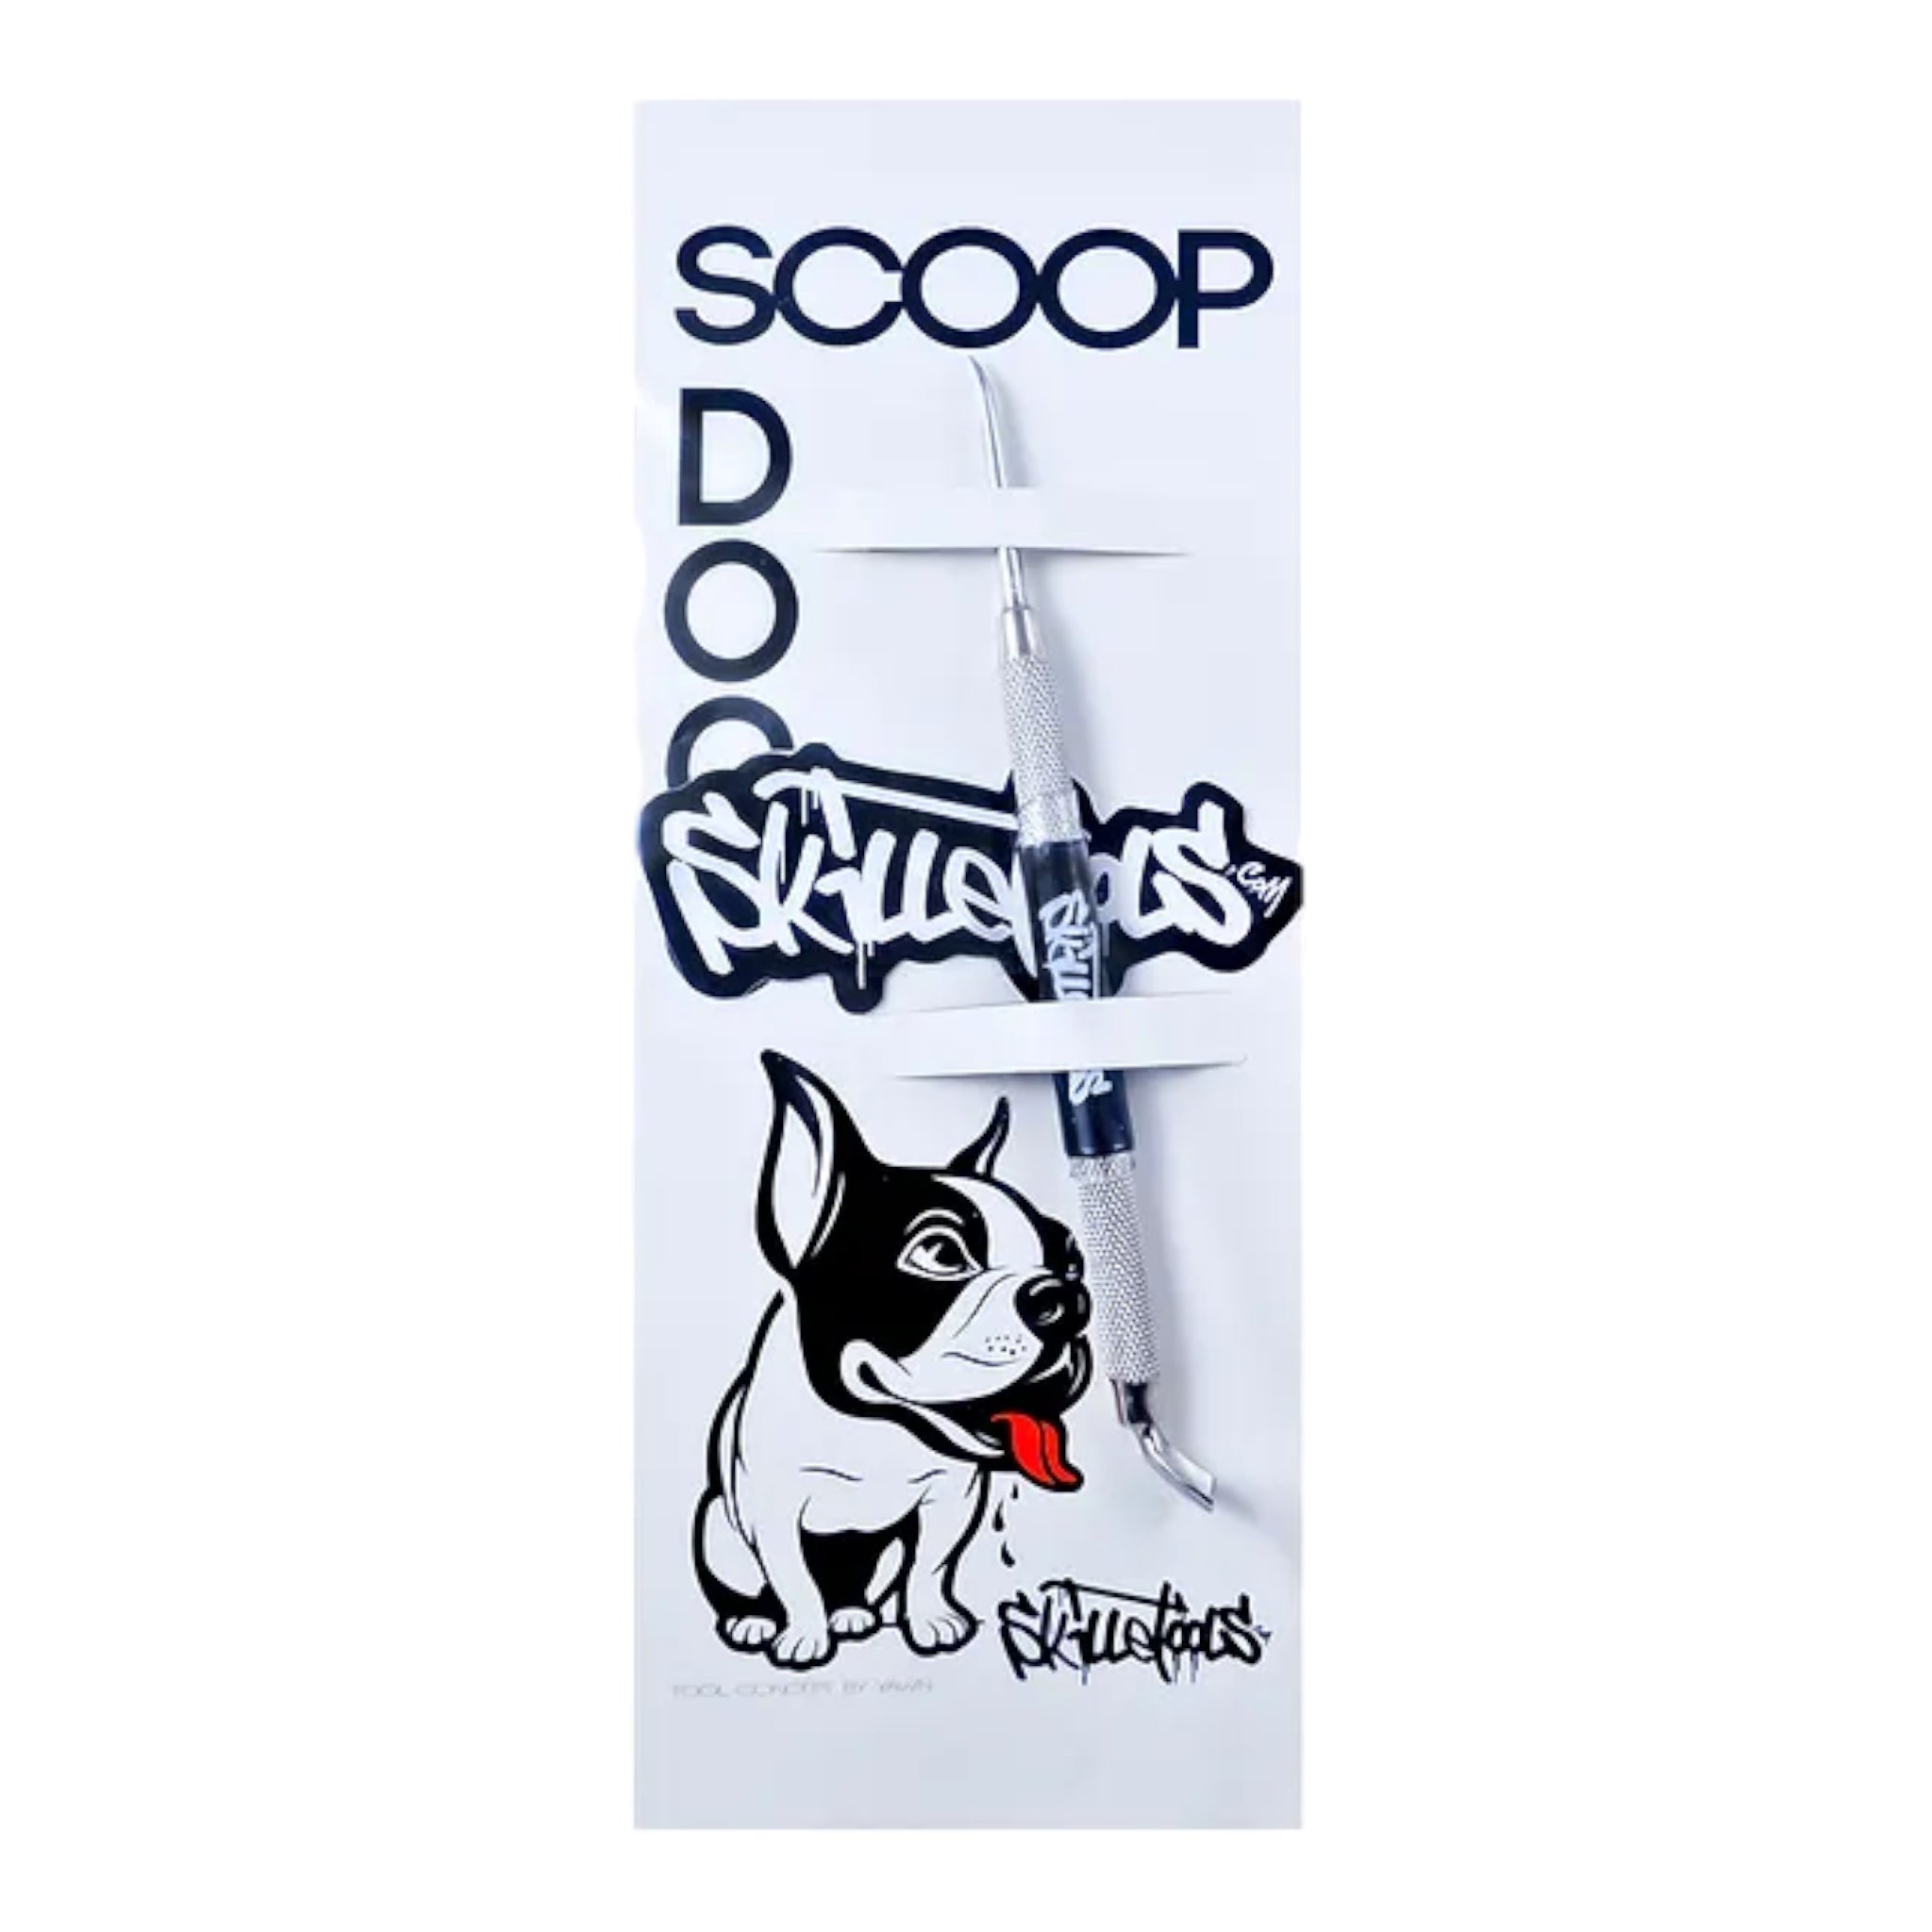 Skilletools - Scoop Dogg - Stainless Steel Double Sided Dab Tool